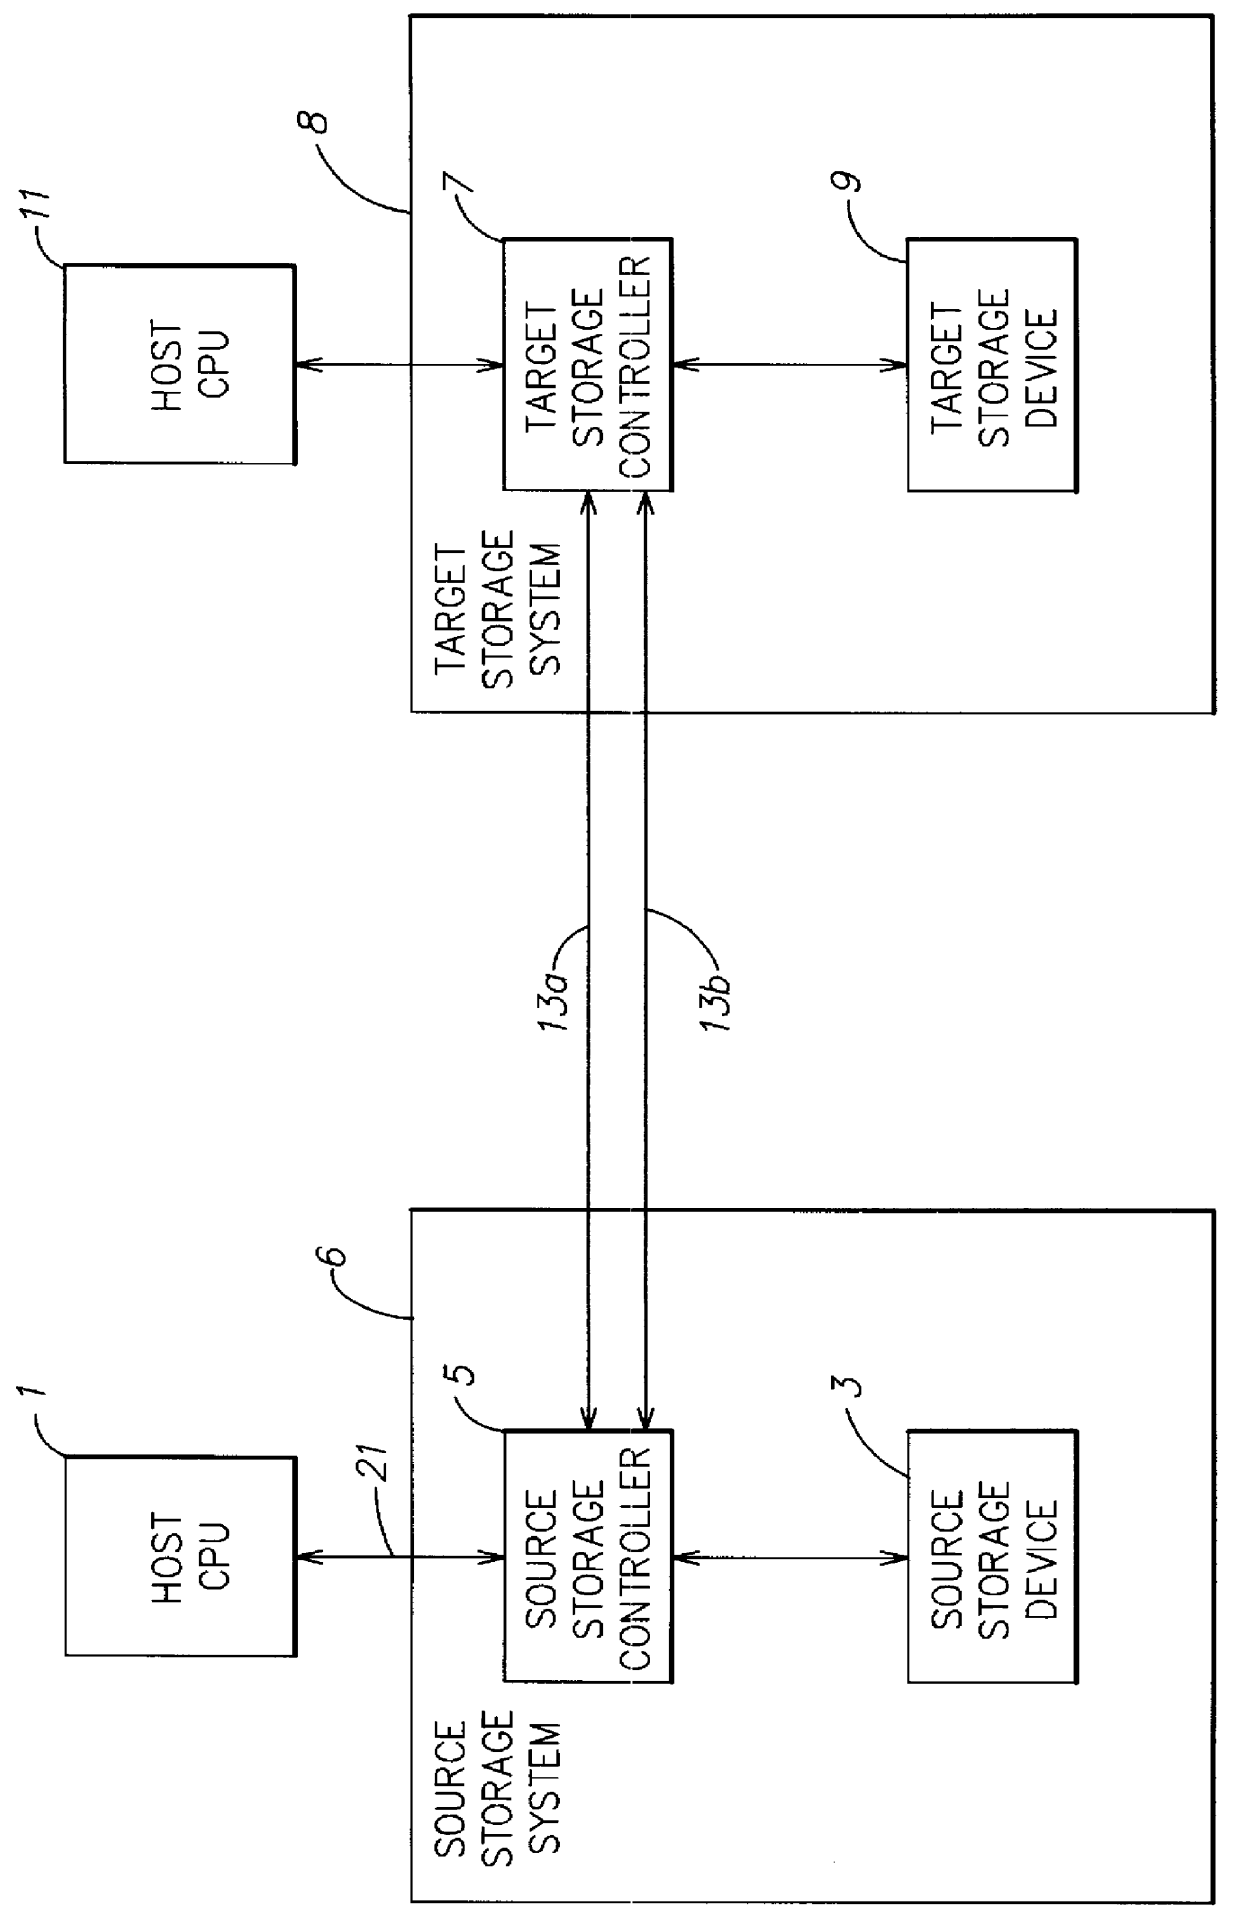 Method and apparatus for asynchronously updating a mirror of a source device